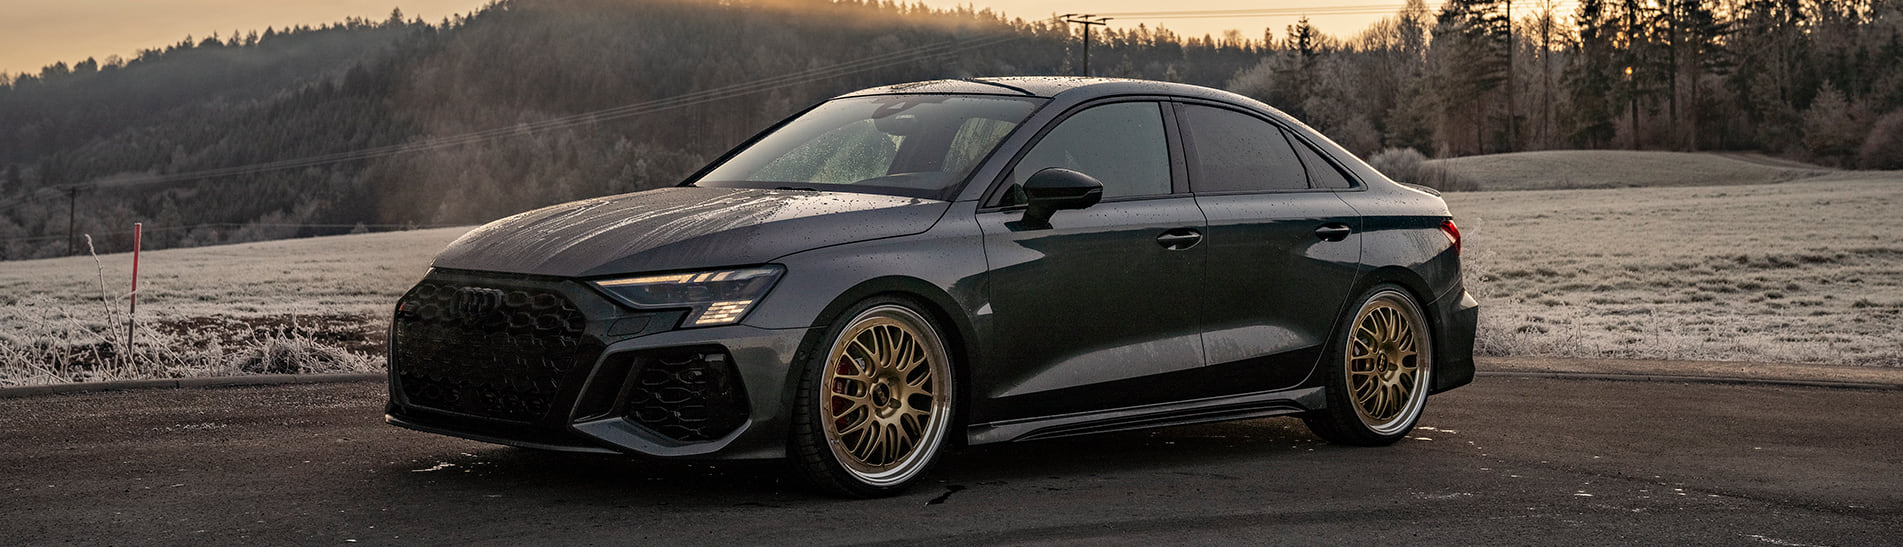 KW automotive has developed the KW DDC plug&play coilover suspension, the KW V3 coilover suspension, and KW height-adjustable springs for the Audi RS3 Sportback and the Audi RS3 sedan.